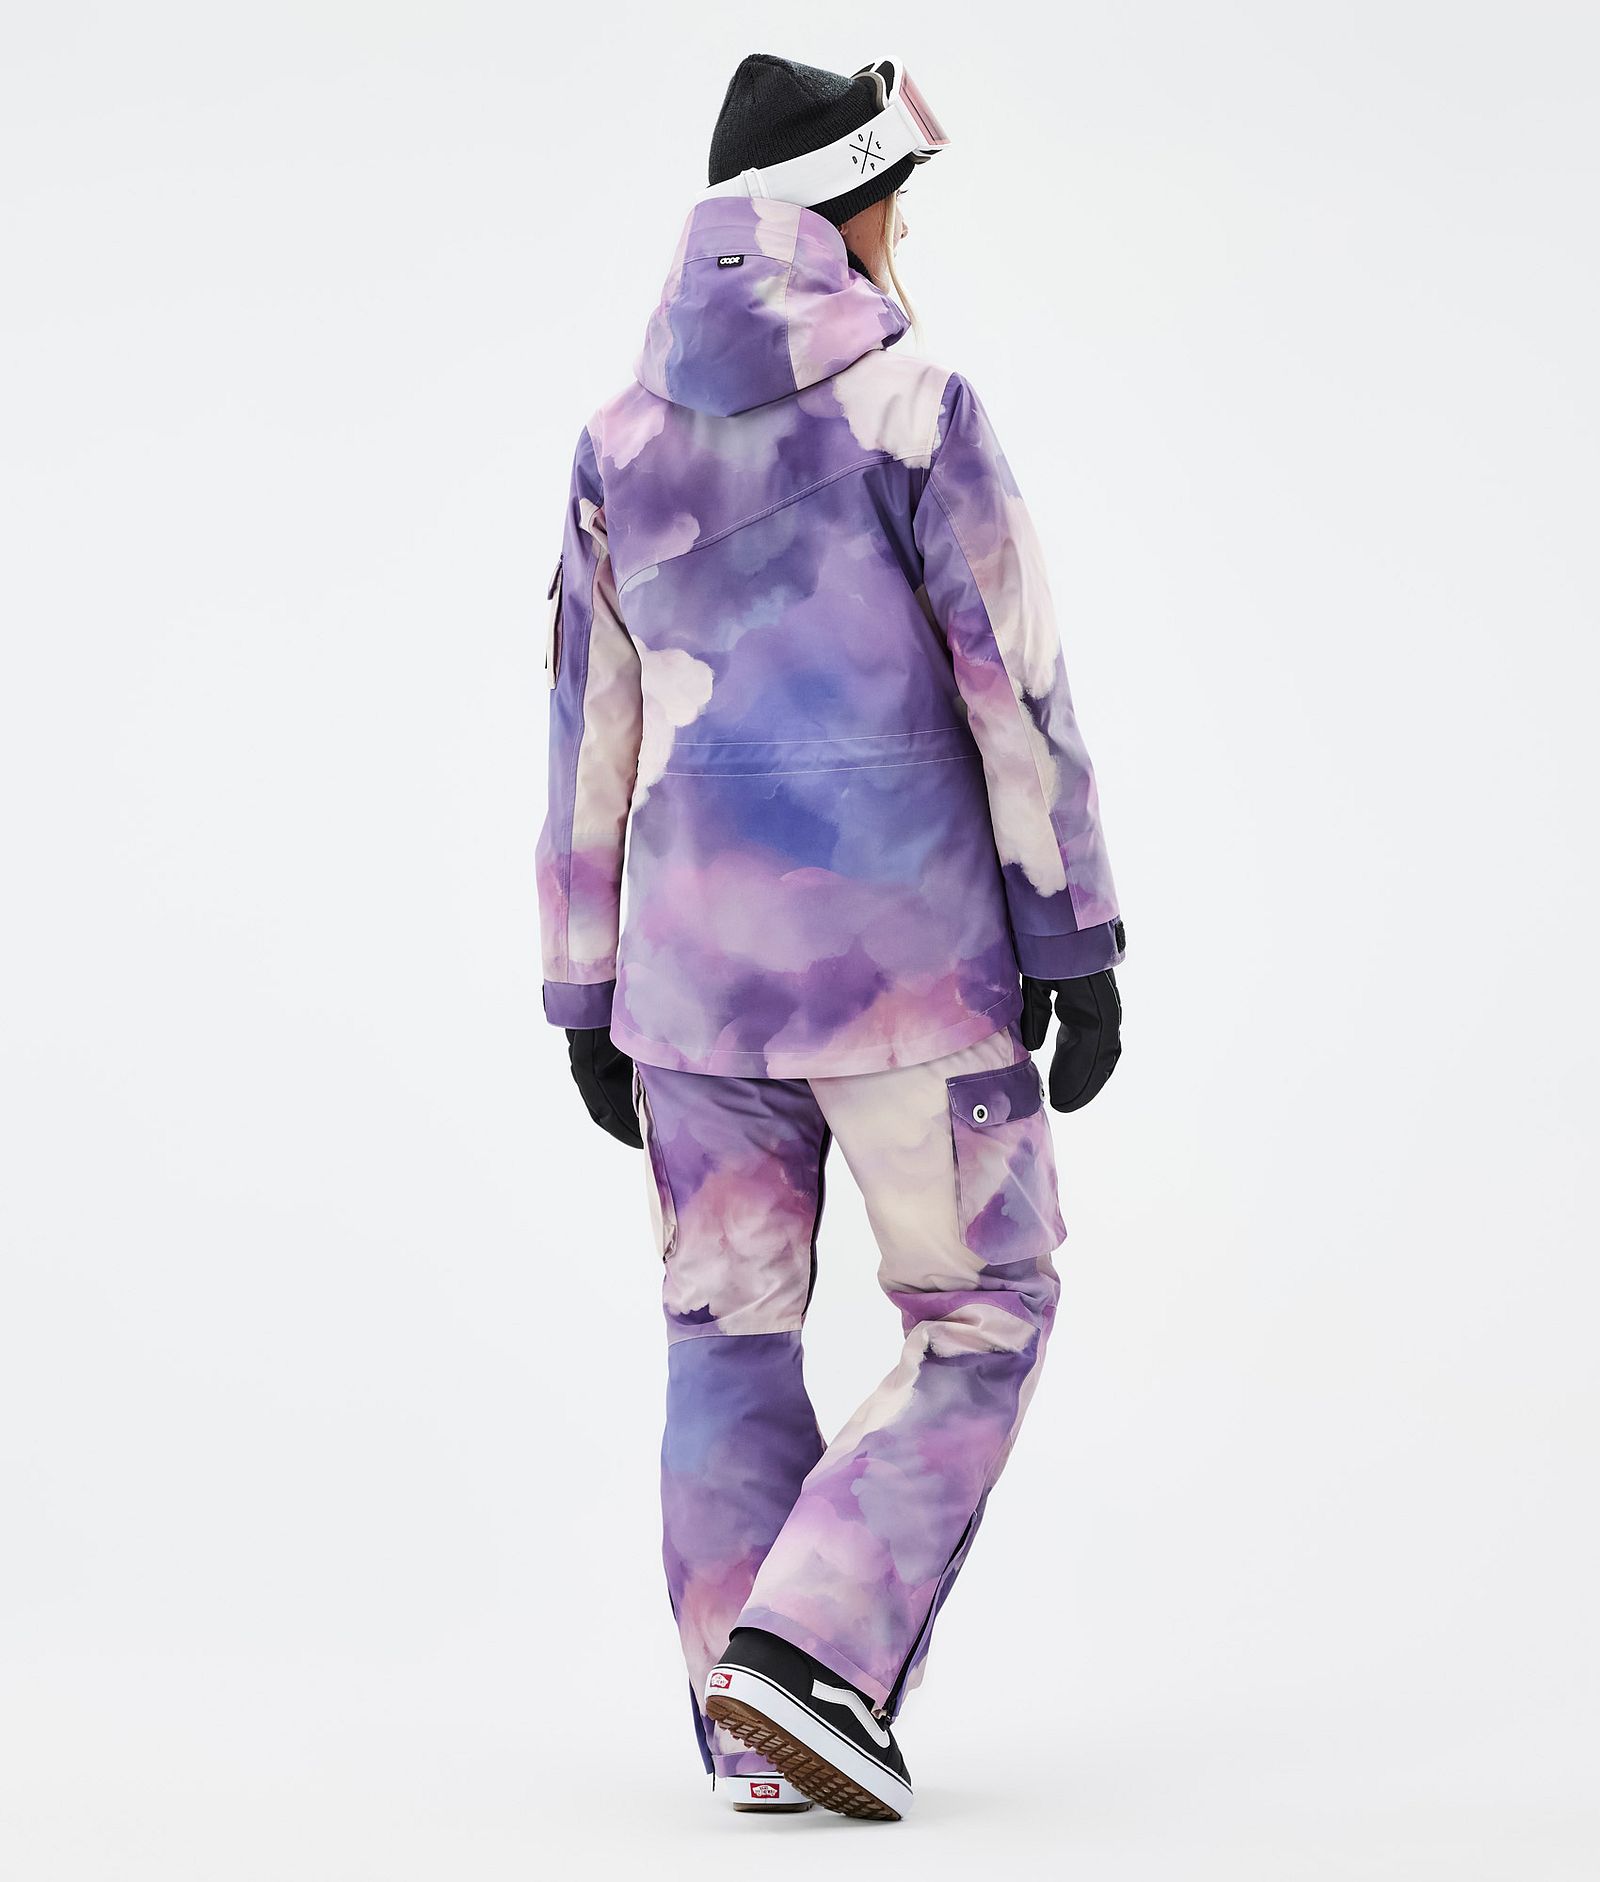 Dope Adept W Outfit Snowboard Femme Heaven/Heaven, Image 2 of 2